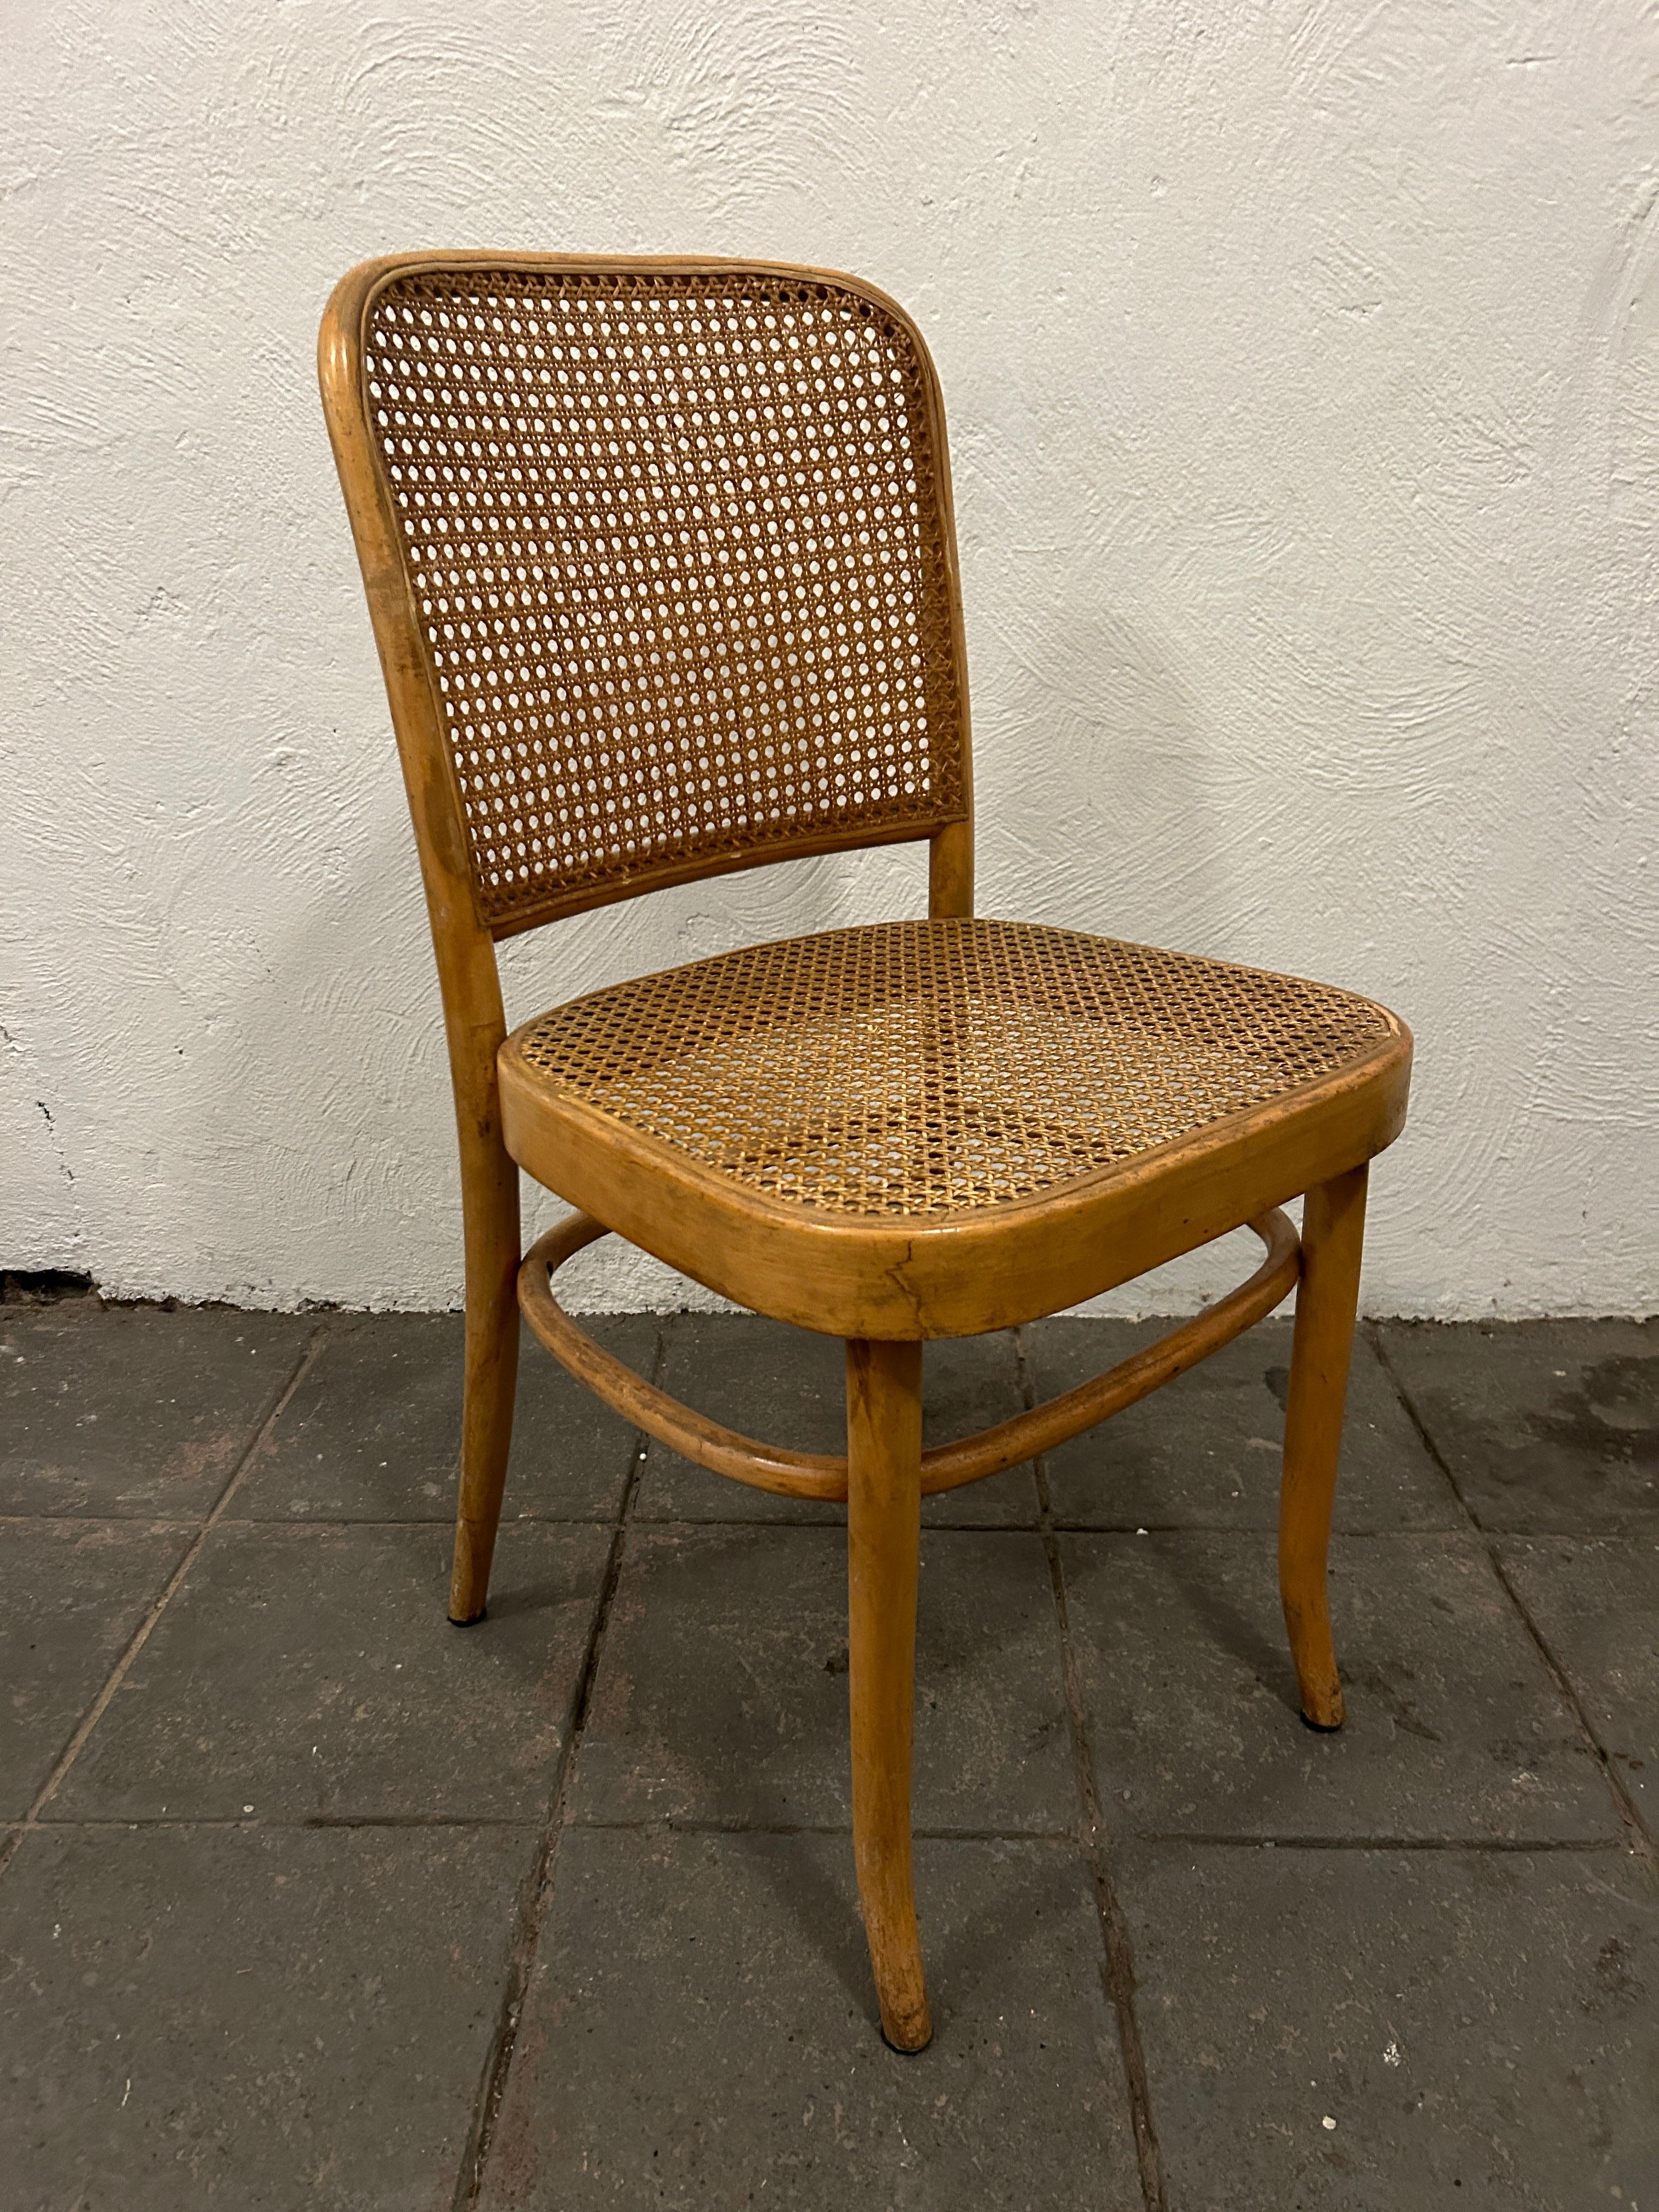 Woodwork Mid Century Vintage Birch Cane Dining Chair by Josef Hoffman 8 Available For Sale